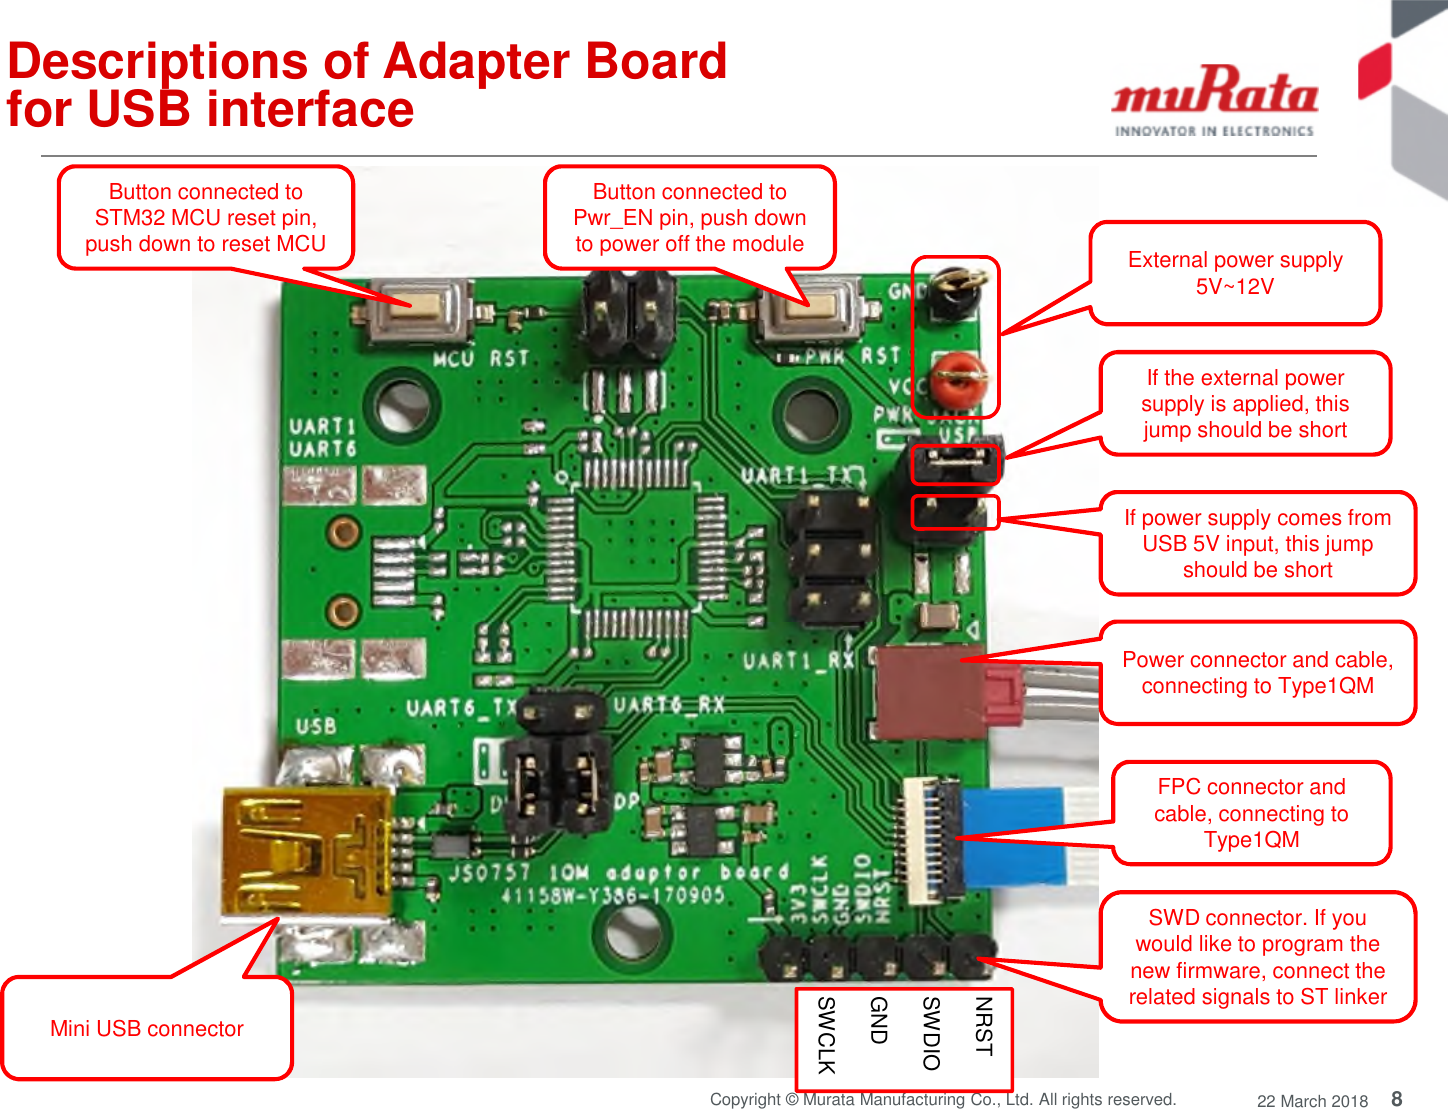 8Copyright © Murata Manufacturing Co., Ltd. All rights reserved. 22 March 2018Descriptions of Adapter Boardfor USB interfaceIf the external powersupply is applied, thisjump should be shortExternal power supply5V~12VIf power supply comes fromUSB 5V input, this jumpshould be shortMini USB connectorSWD connector. If youwould like to program thenew firmware, connect therelated signals to ST linkerNRSTSWDIOGNDSWCLKFPC connector andcable, connecting toType1QMPower connector and cable,connecting to Type1QMButton connected toPwr_EN pin, push downto power off the moduleButton connected toSTM32 MCU reset pin,push down to reset MCU